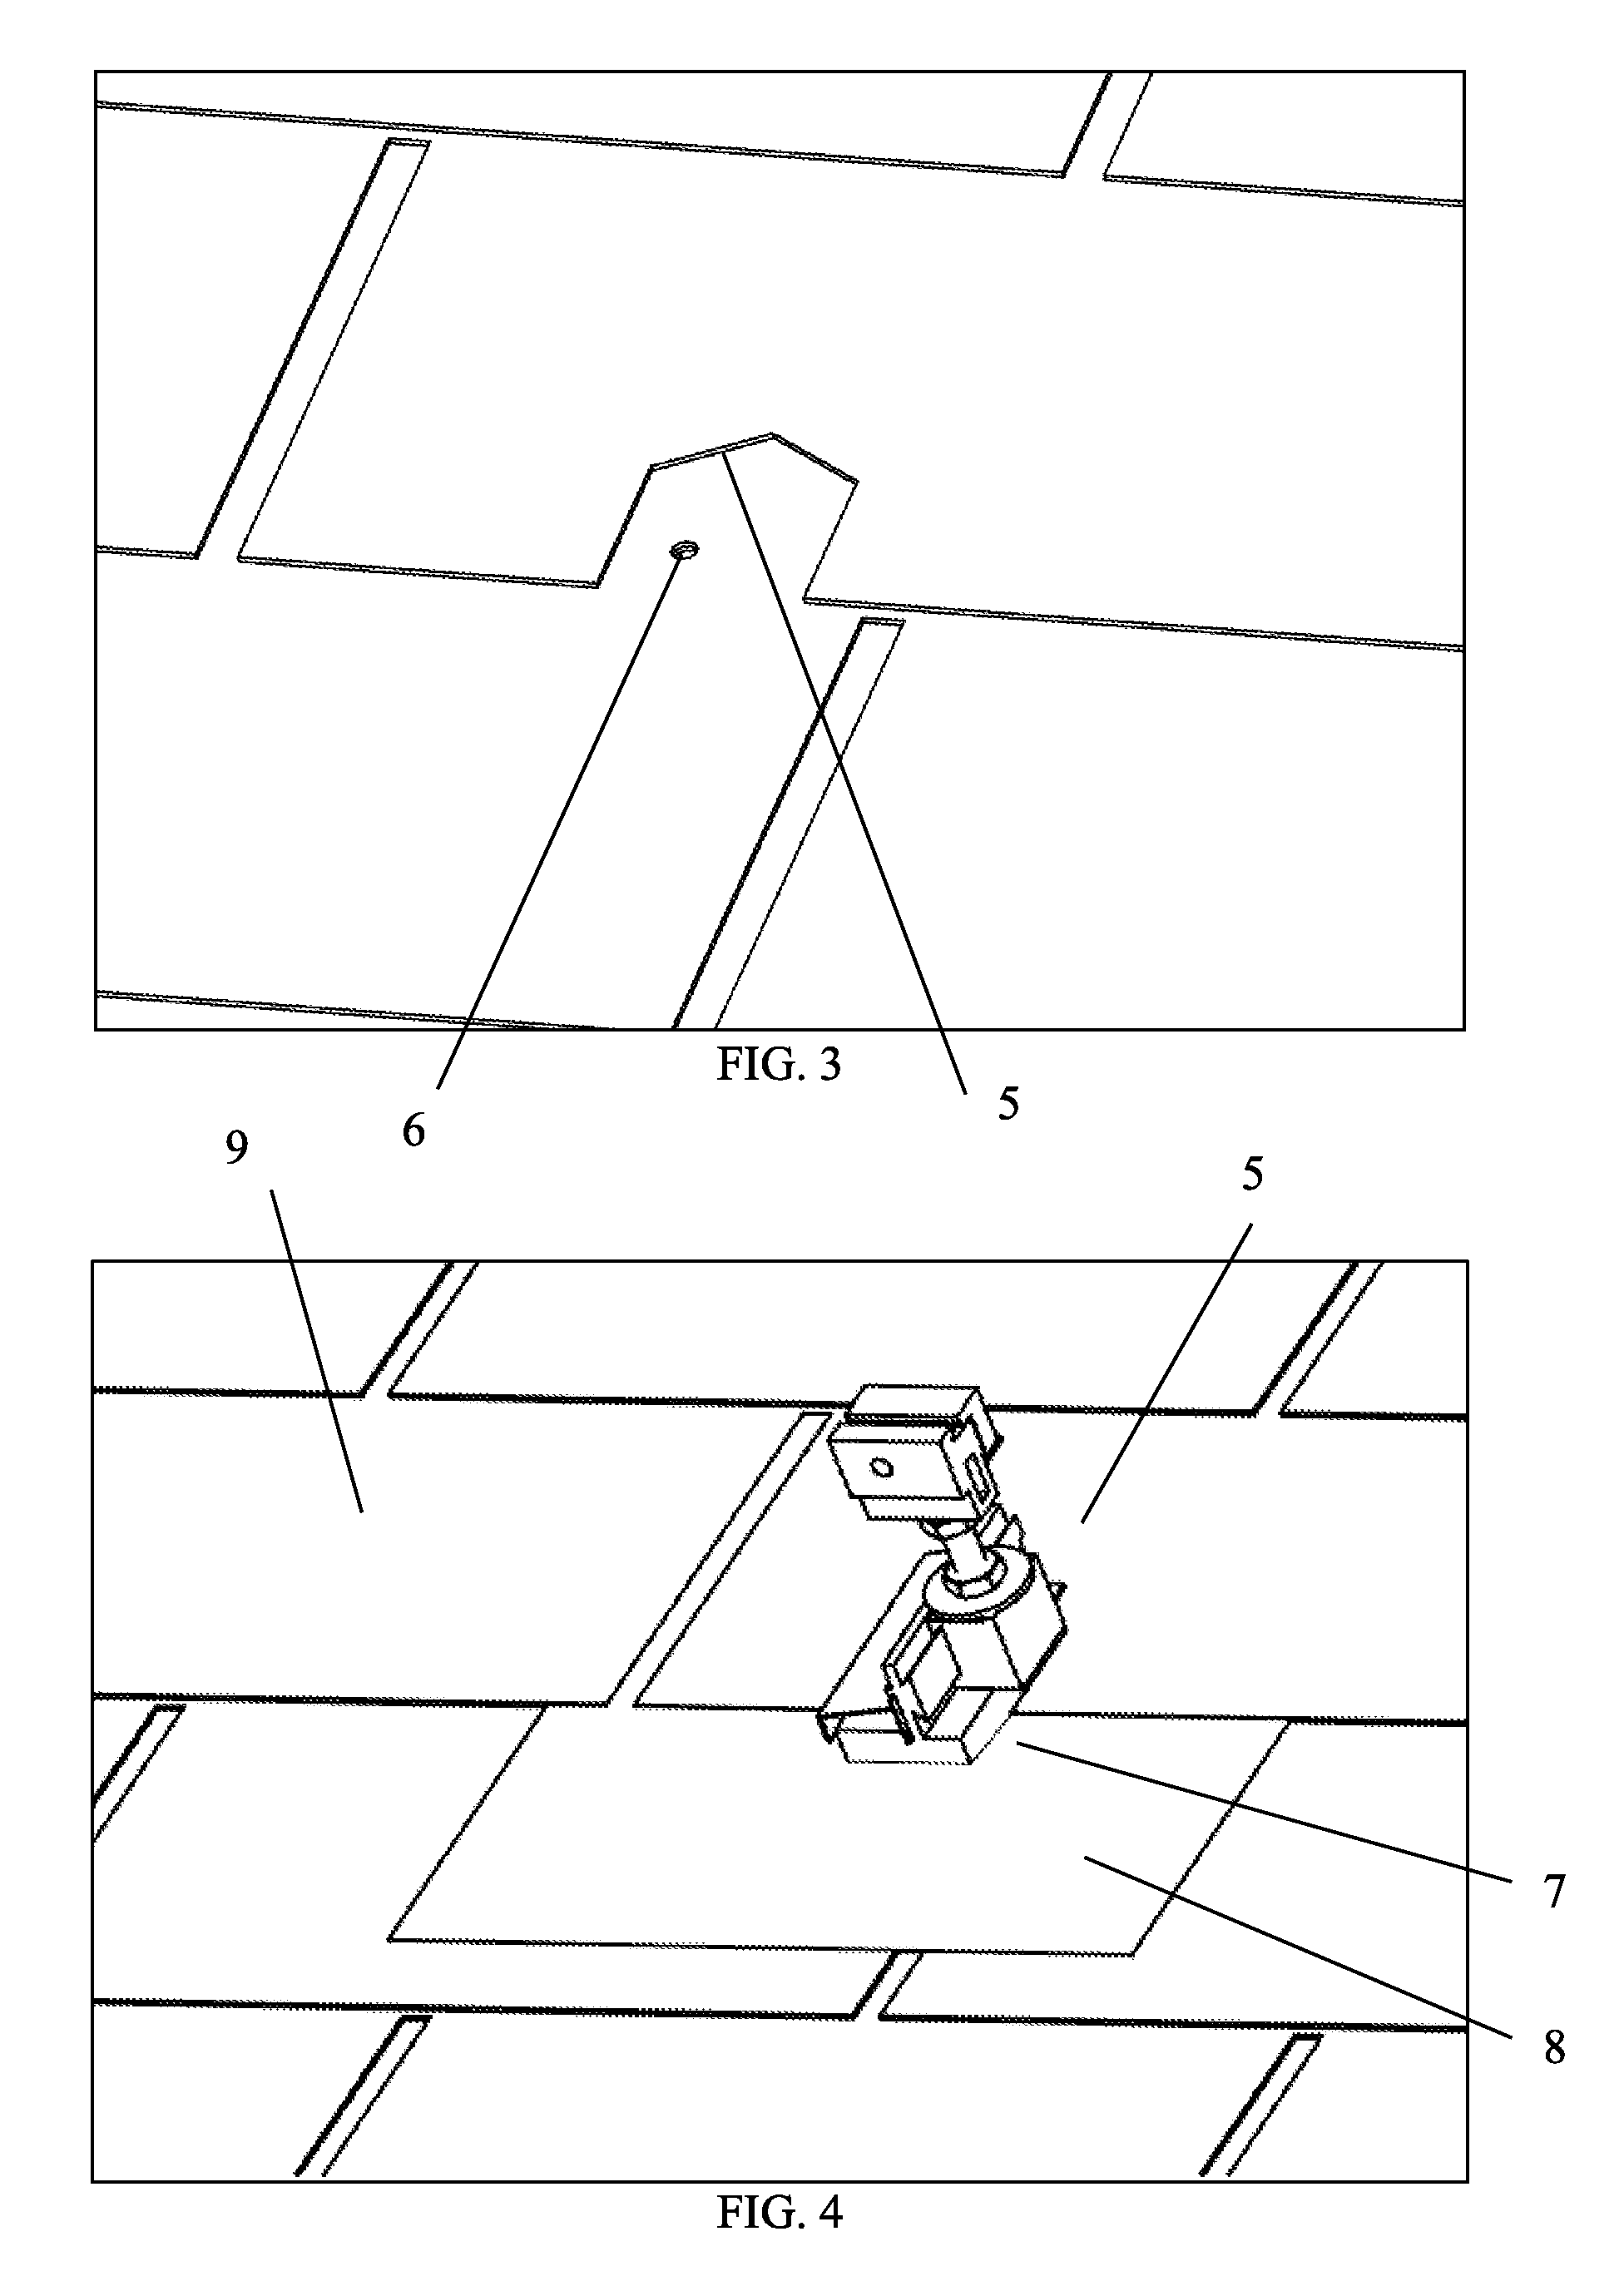 Method and apparatus for mounting solar panels